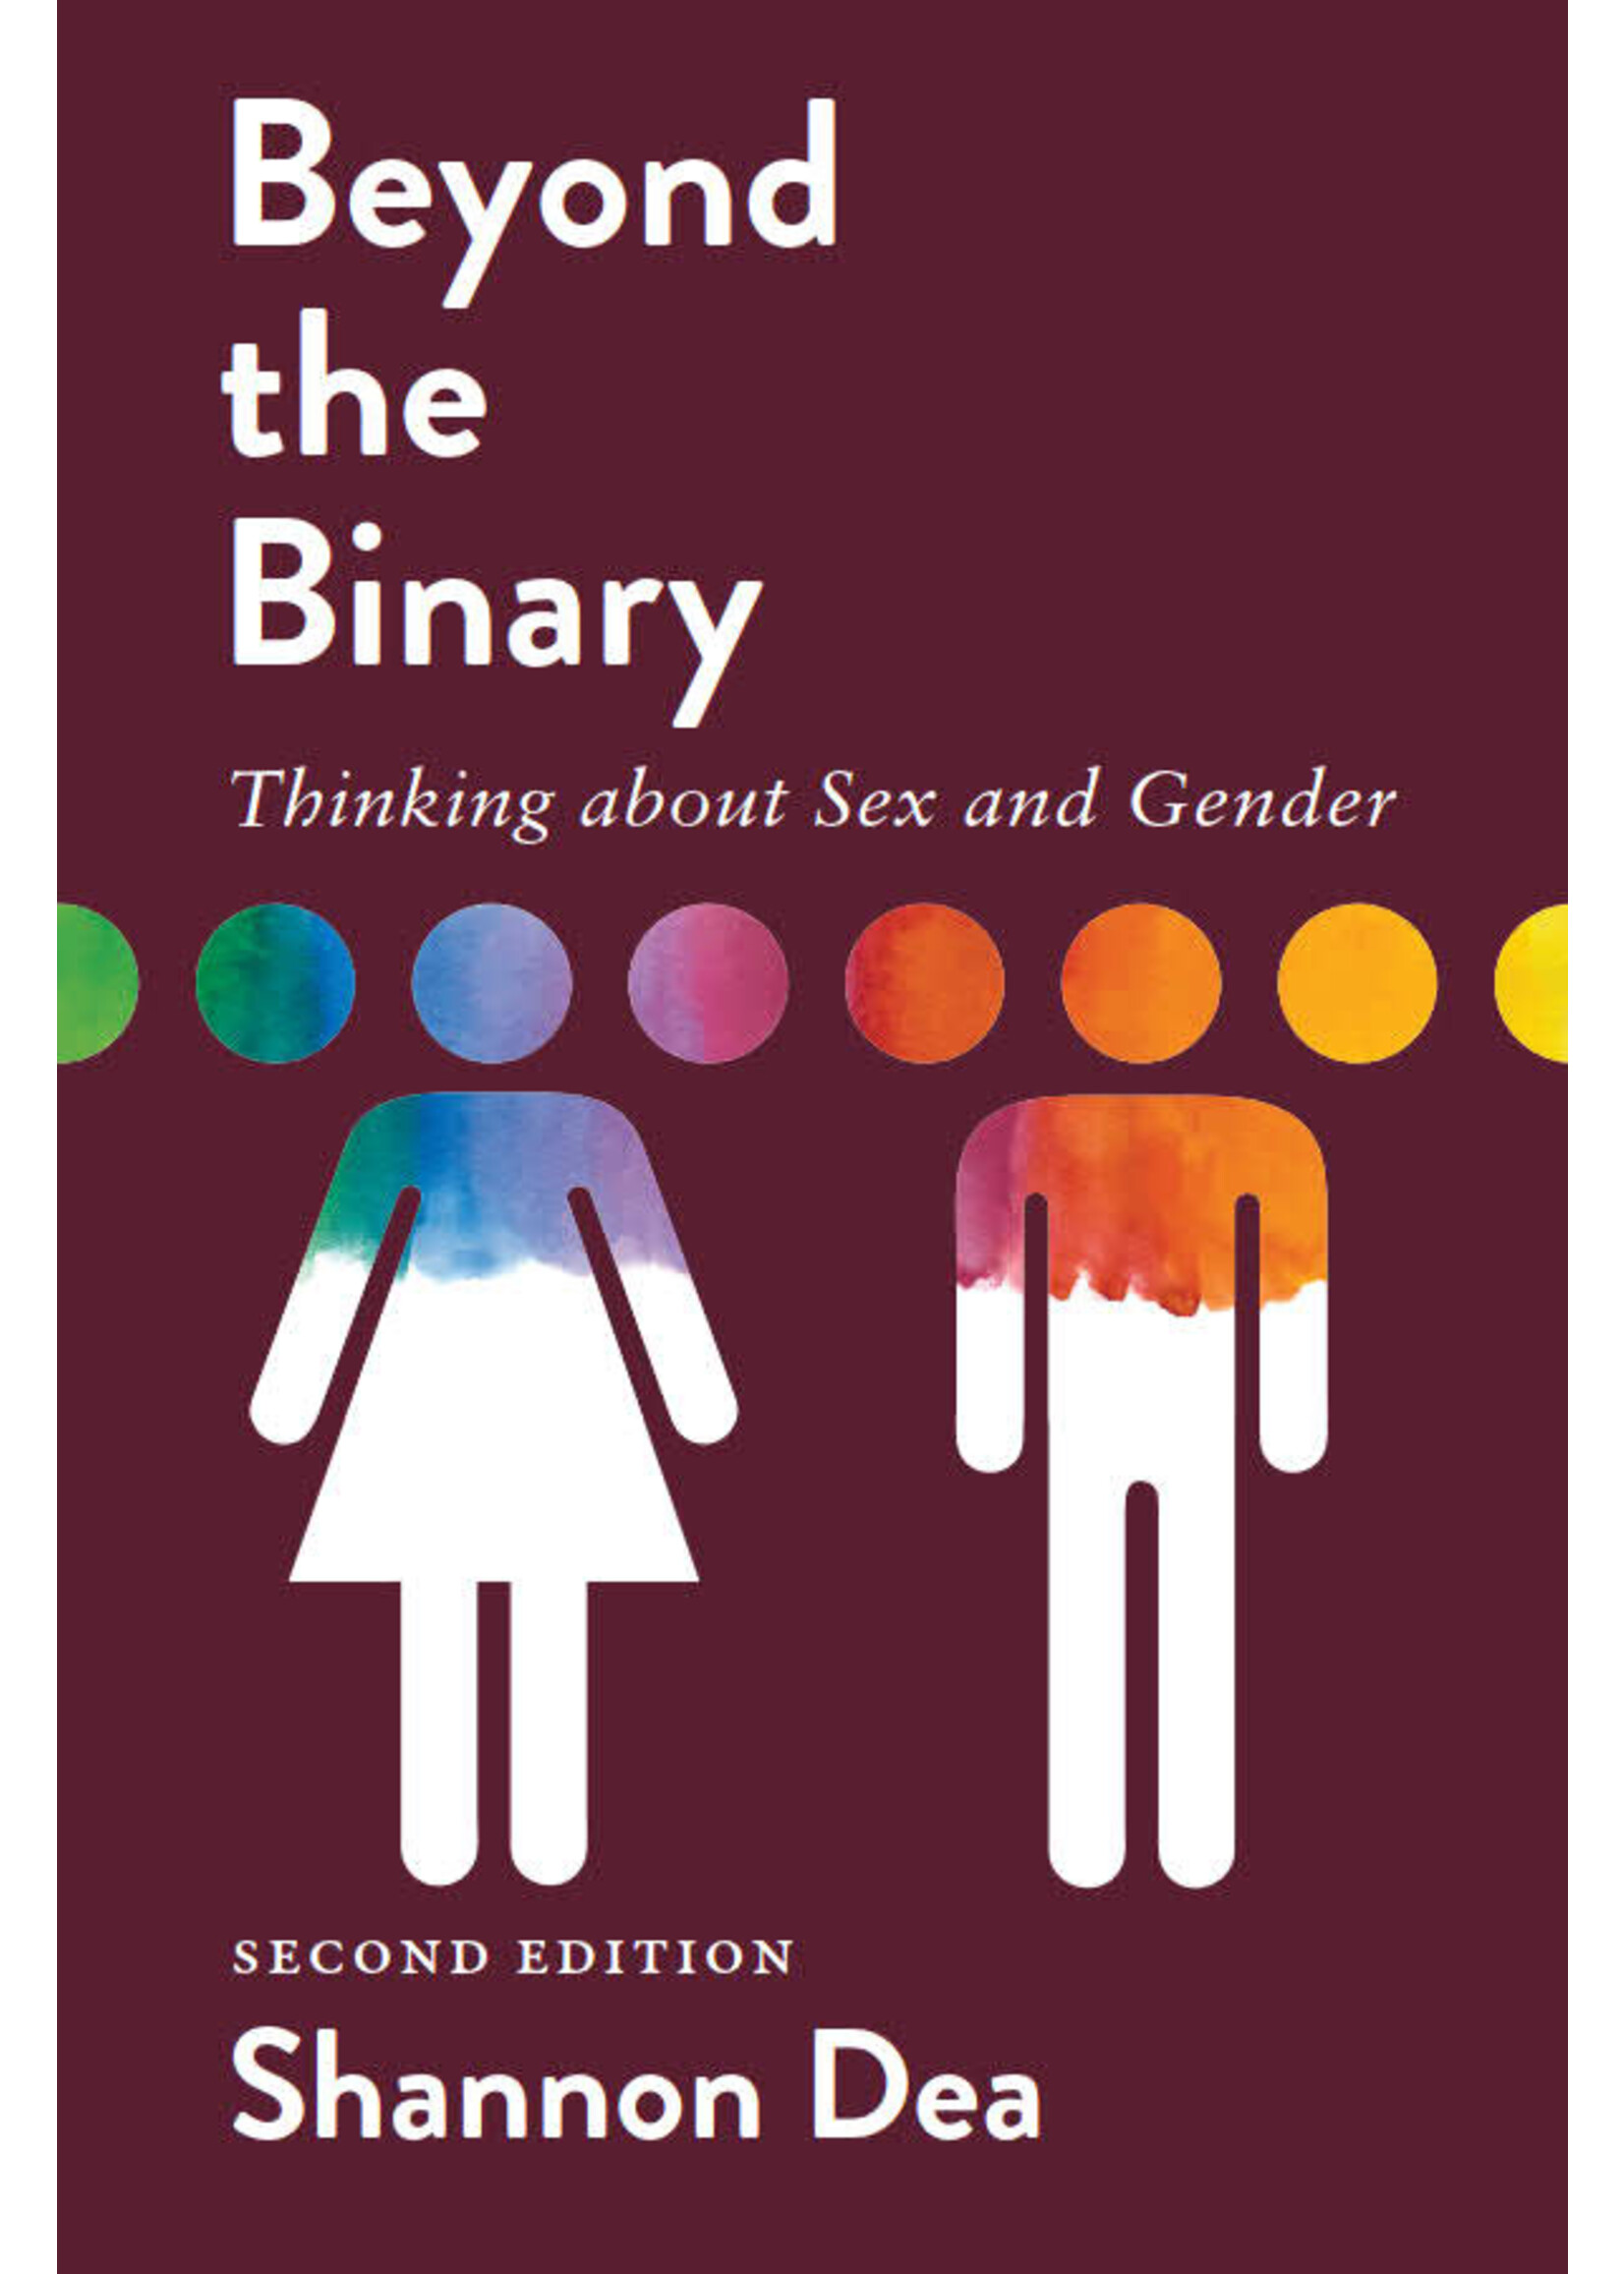 Beyond the Binary: Thinking about Sex and Gender, 2nd ed. by Shannon Dea